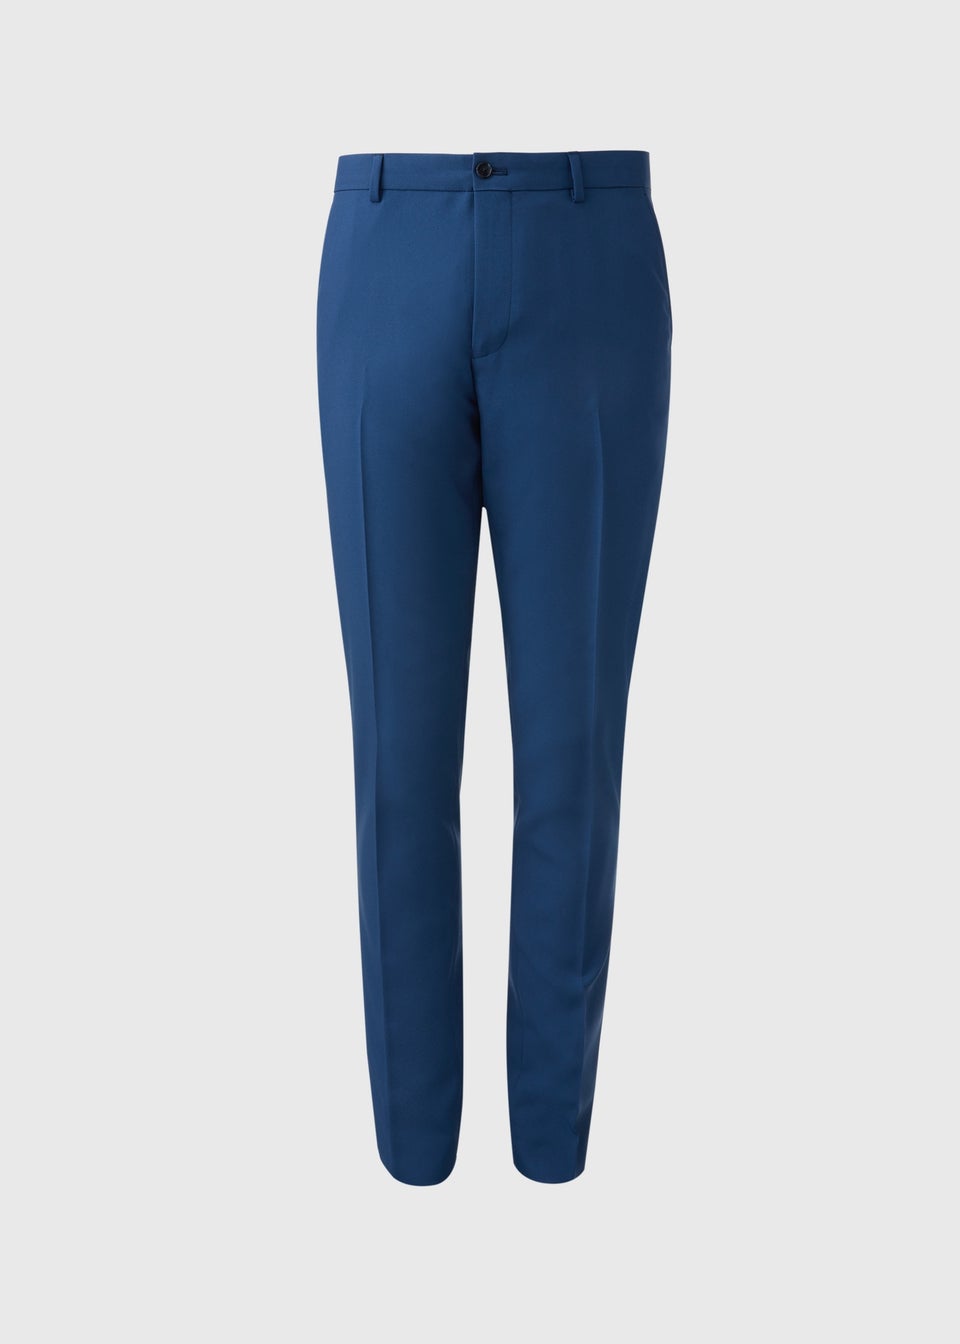 Taylor & Wright Panama Blue Skinny Fit Trousers